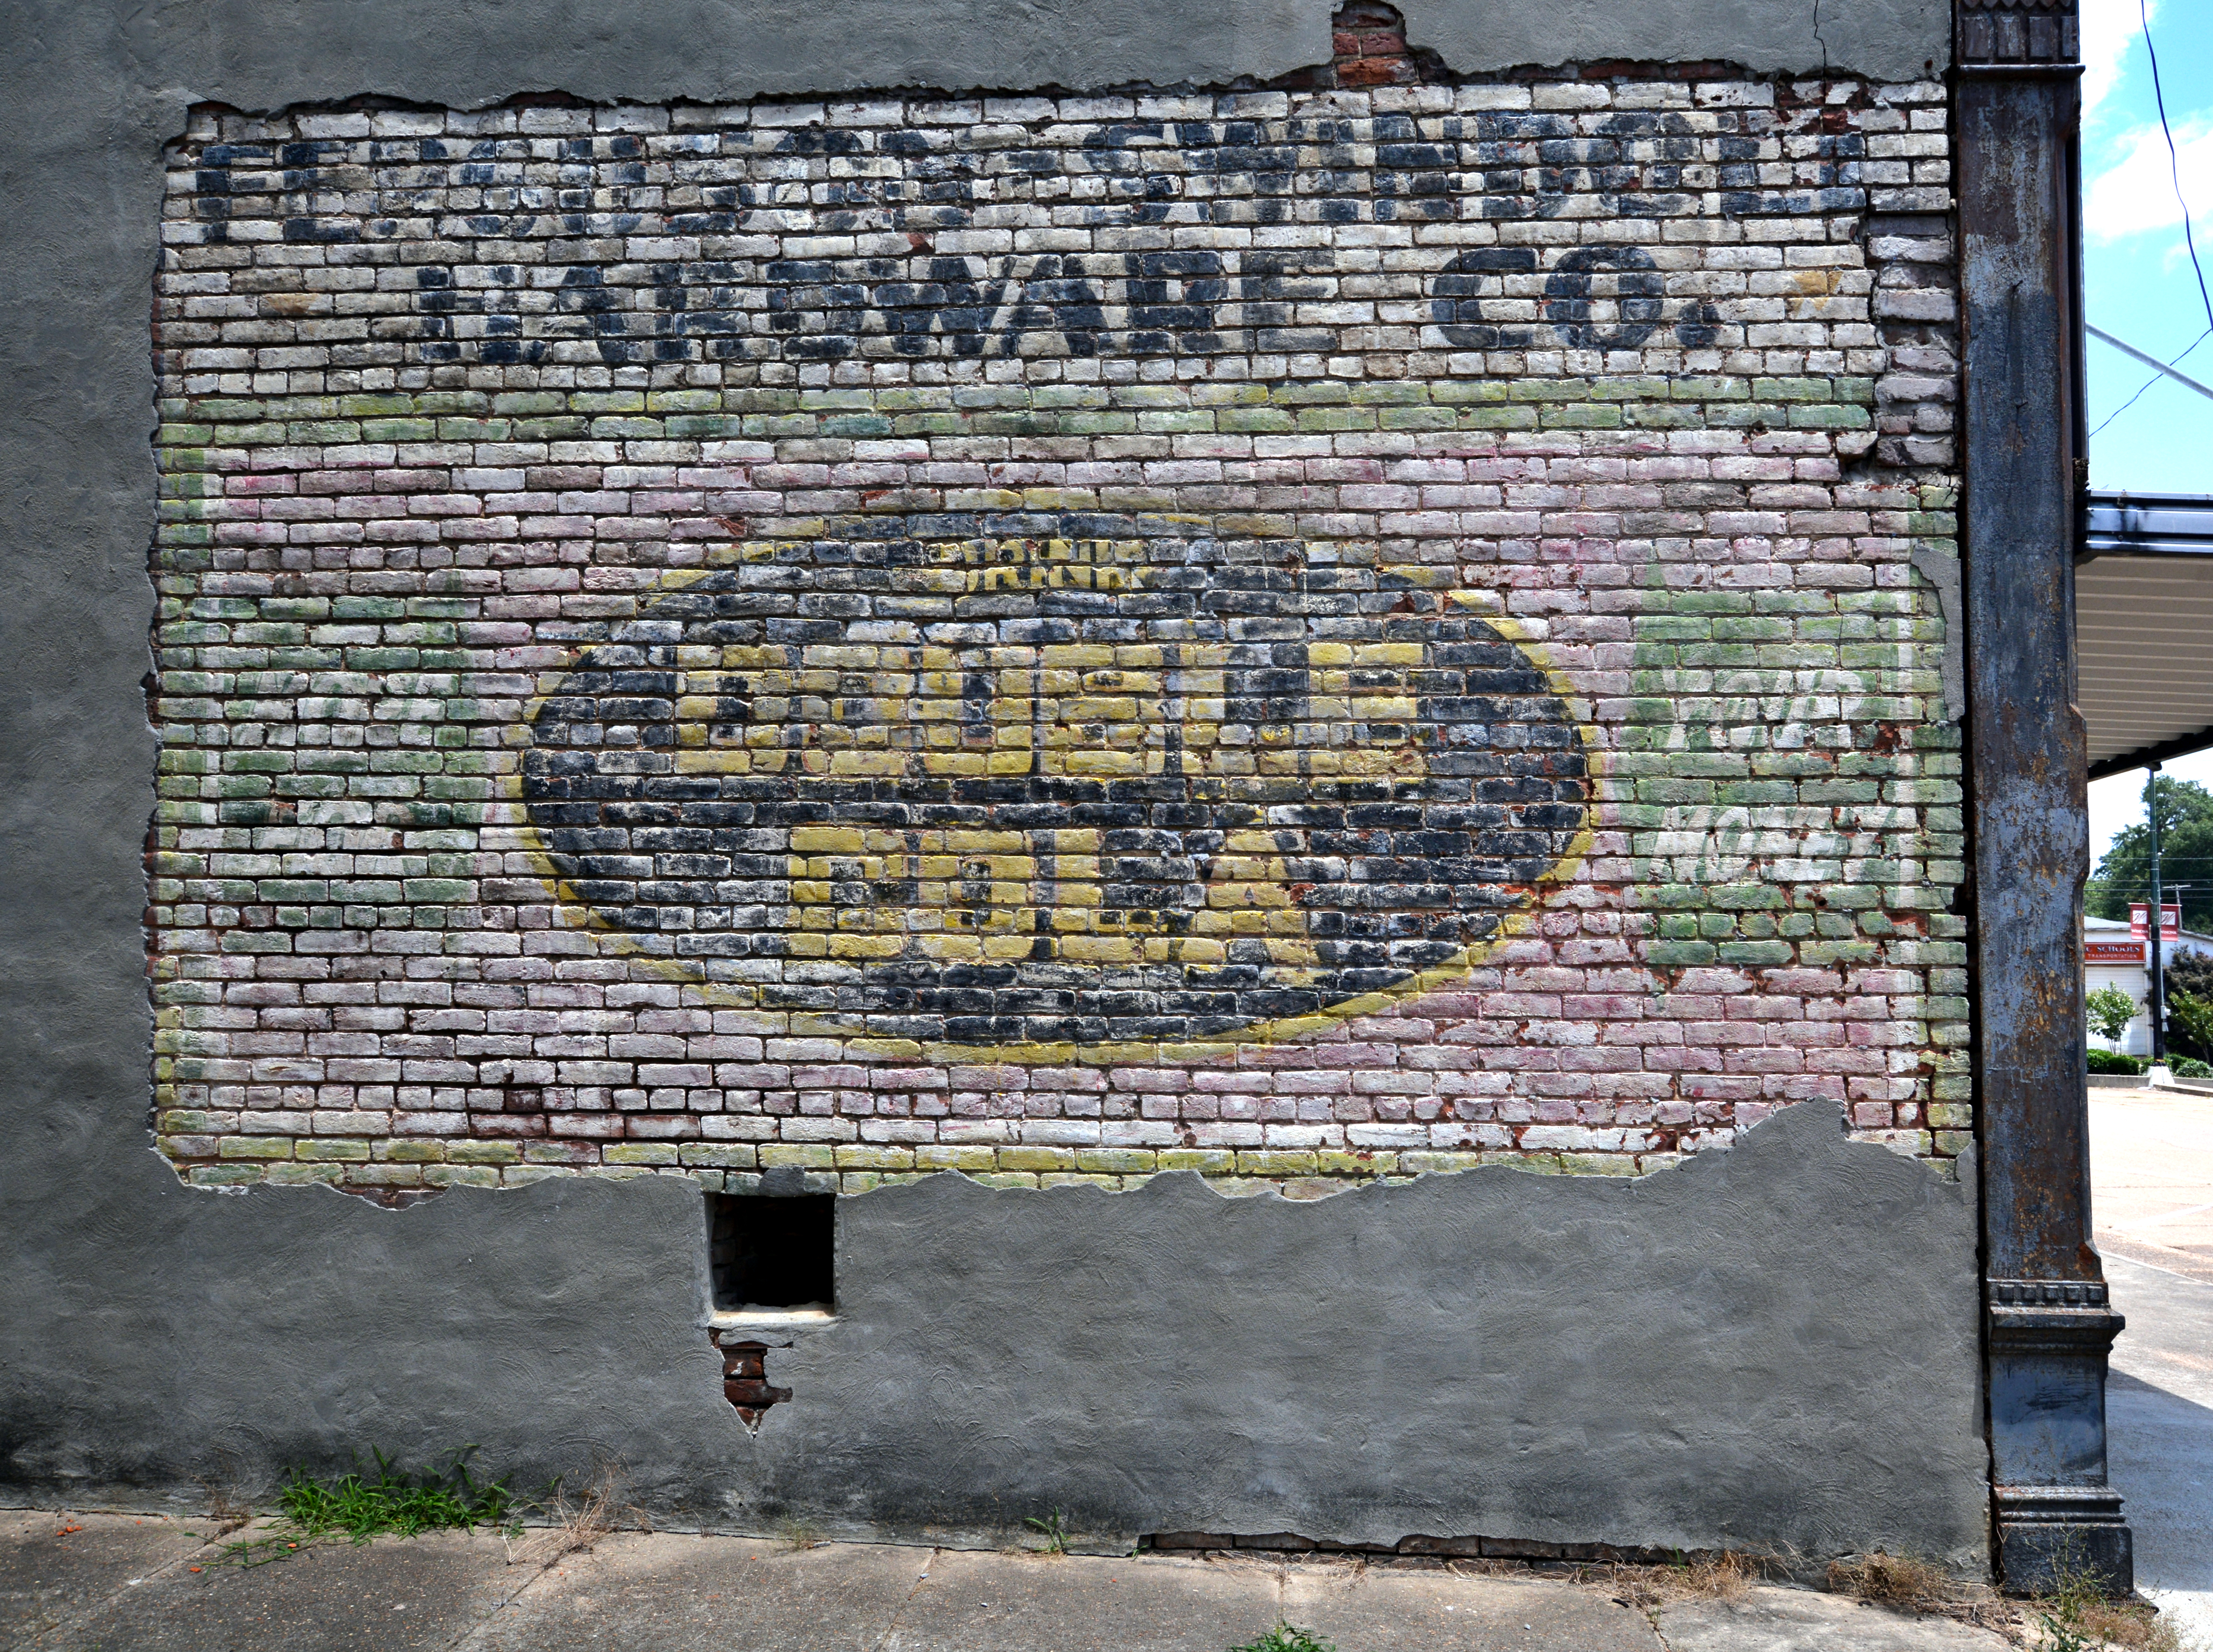 Double Cola ghost sign - Winona, Mississippi U.S.A. - June 10, 2017